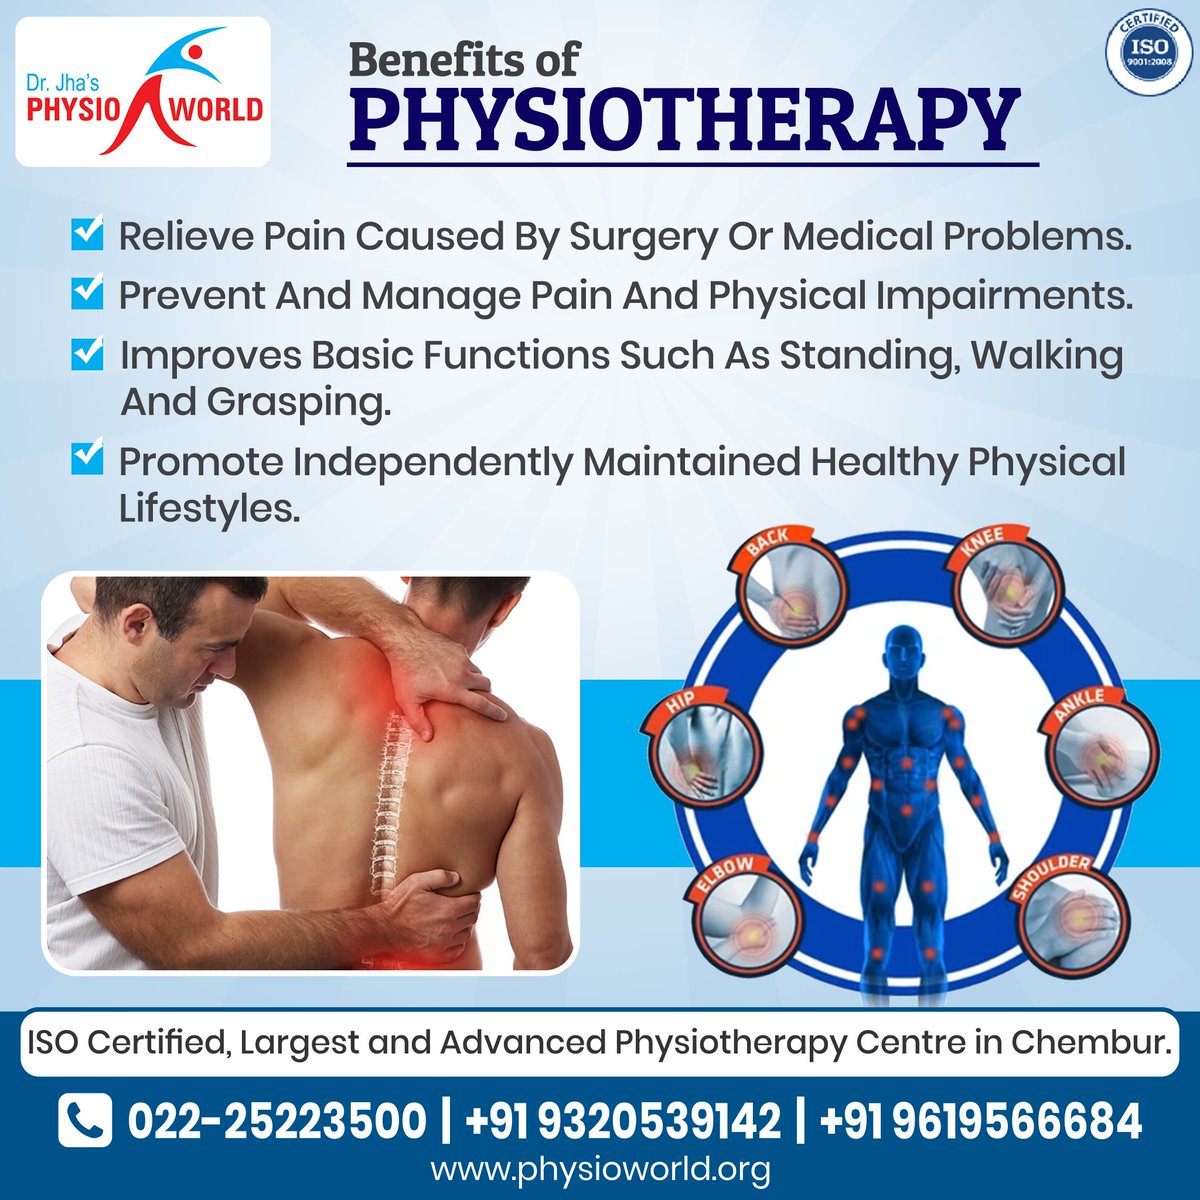 Top Benefits of #Physiotherapy – A Pathway to Long Term Pain Relief.

𝐃𝐫 𝐉𝐡𝐚'𝐬 𝐏𝐡𝐲𝐬𝐢𝐨𝐰𝐨𝐫𝐥𝐝
📞: 022-2522 3500
📌: #Chembur, #Mumbai.
🌐: physioworld.org

#Physioworld #DrNirajJha #painrelief #PhysiotherapyBenefits #PainRelieve #Injury #BodyPain #KneePain